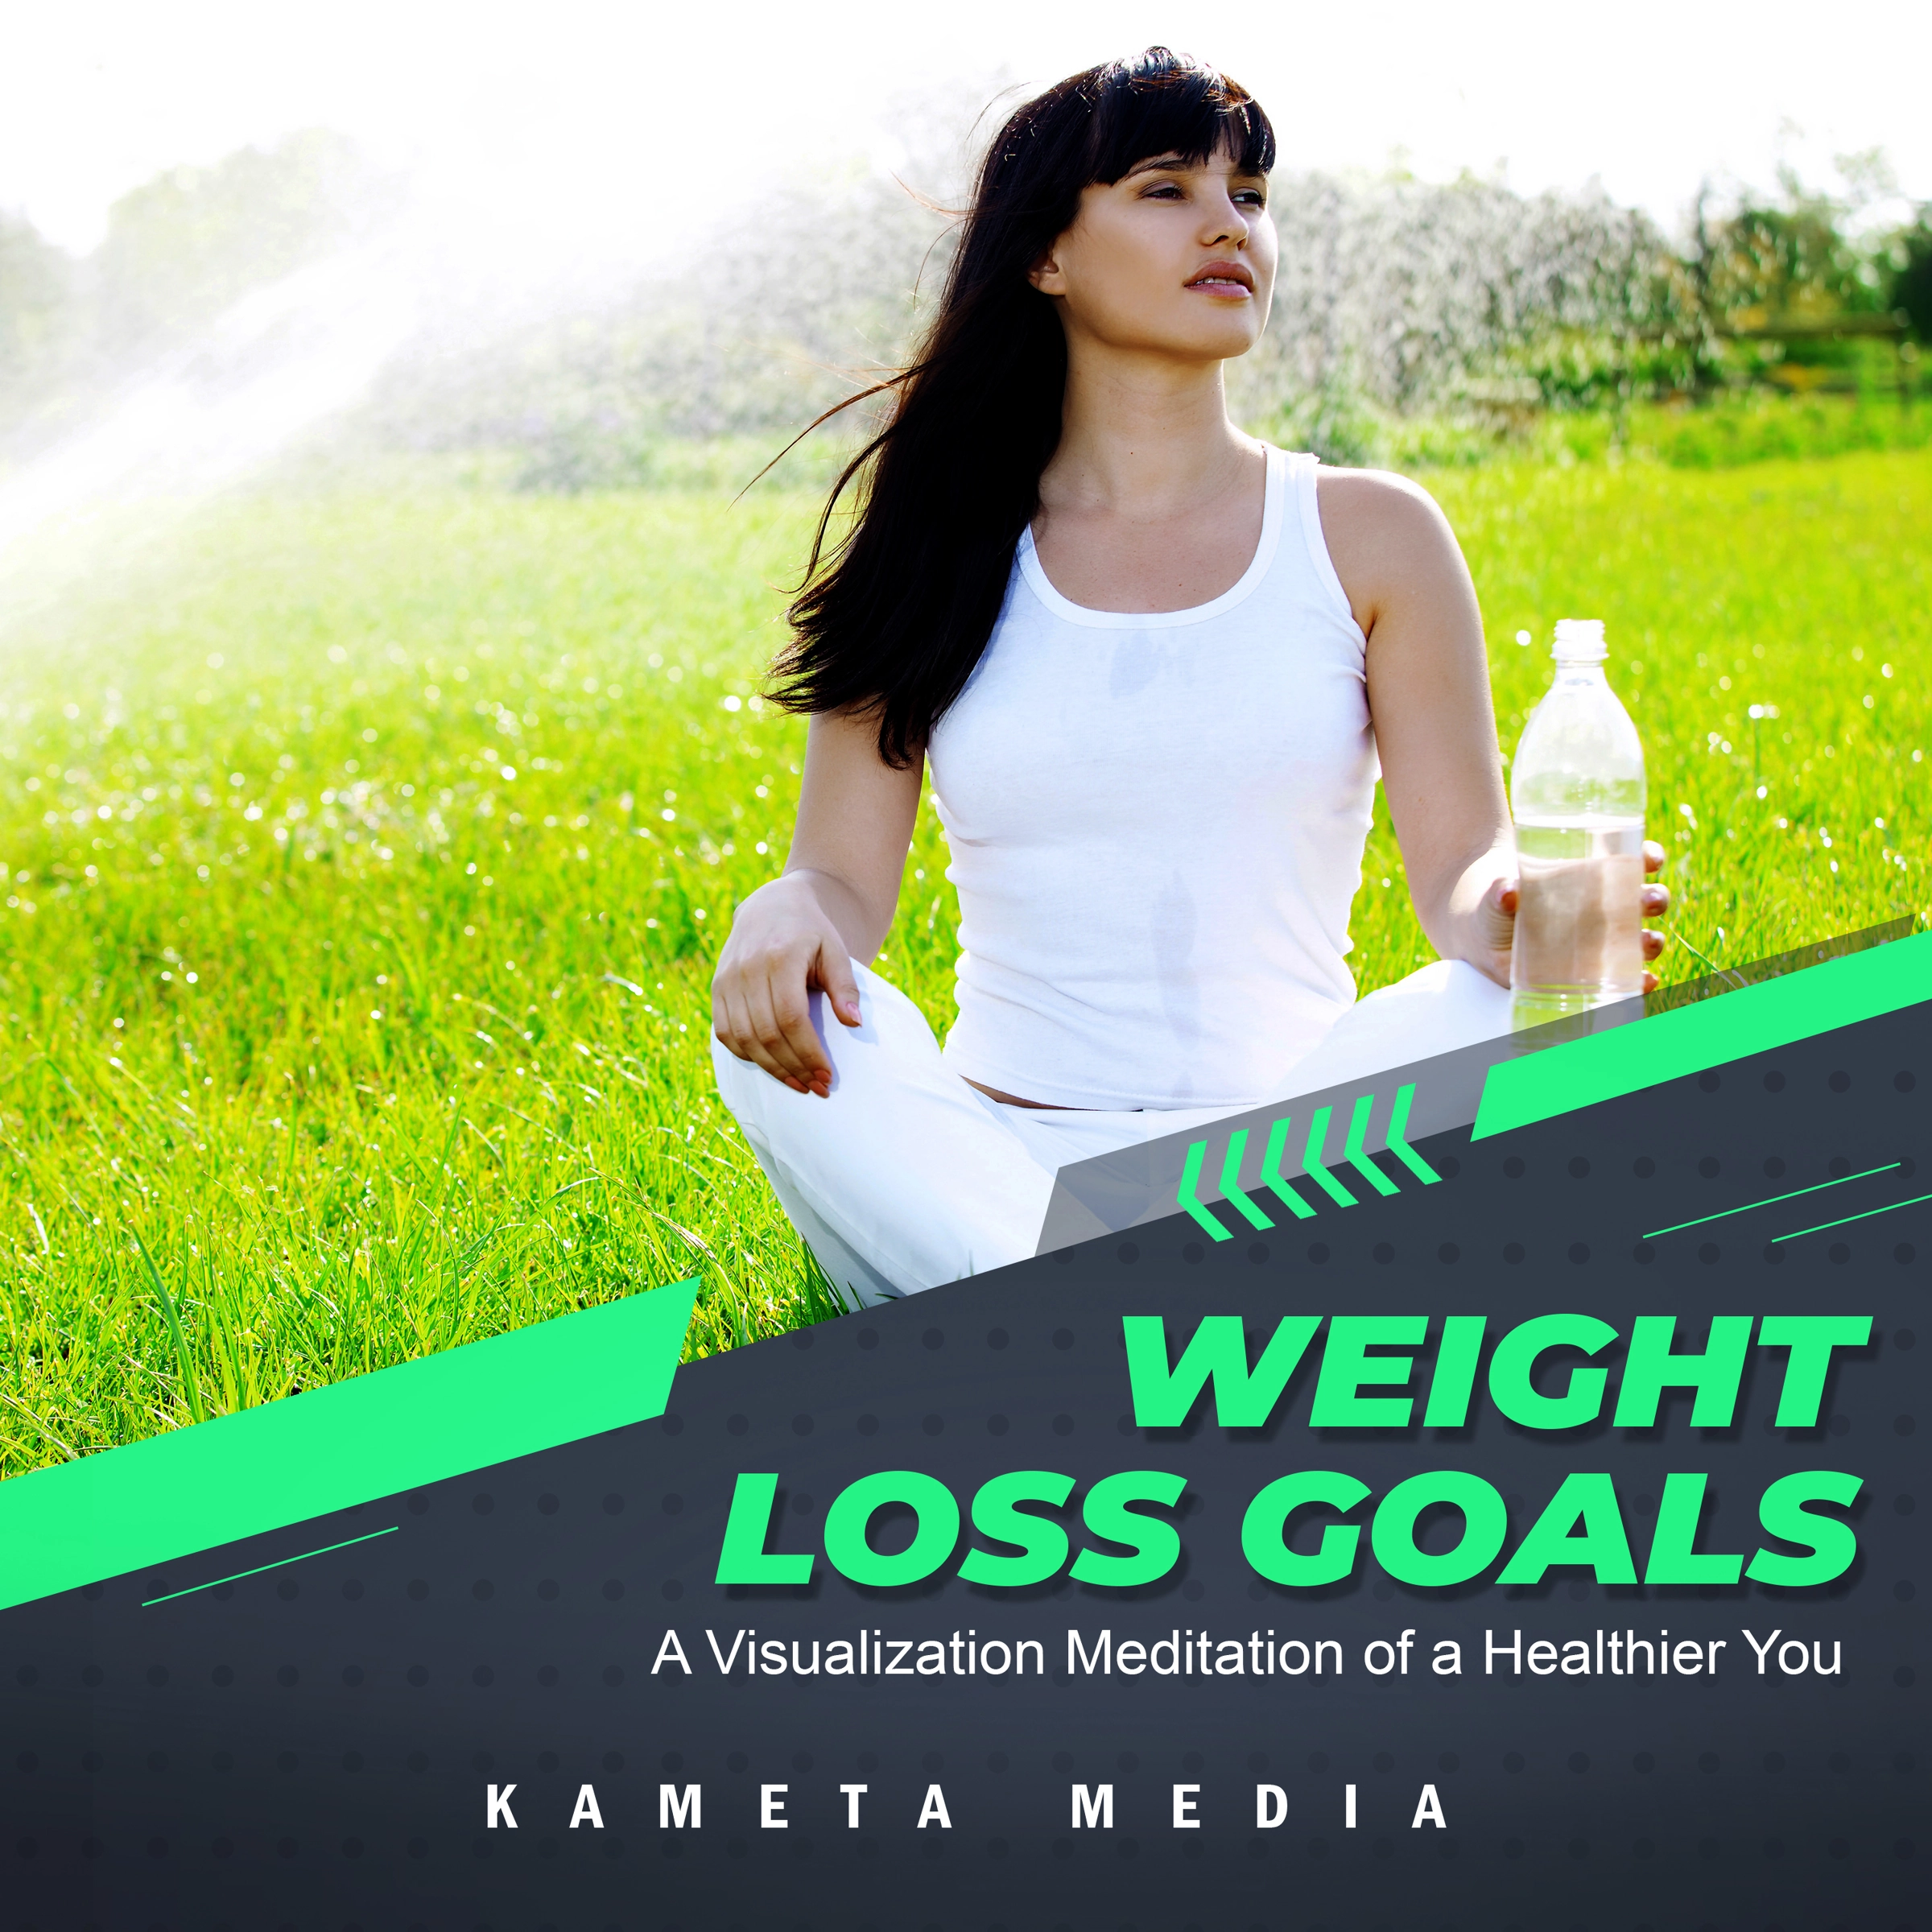 Weight Loss Goals: A Visualization Meditation of a Healthier You Audiobook by Kameta Media